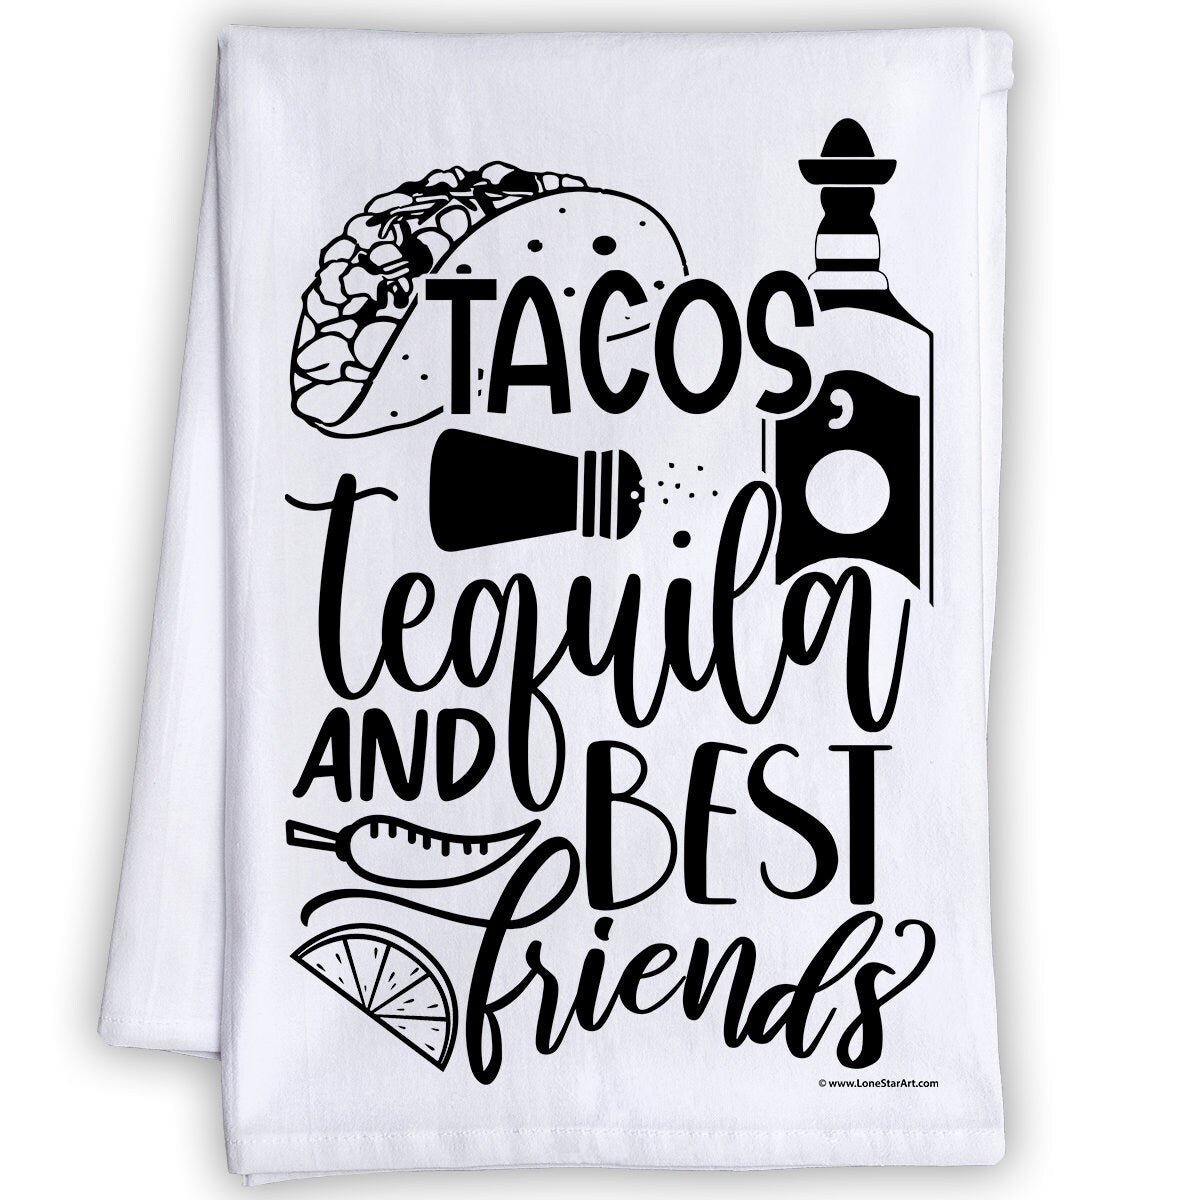 Funny Kitchen Tea Towels - Tacos Tequila and Best Friends - Humorous Flour Sack Dish Towel - Great Housewarming Gift and Kitchen Decor Lone Star Art 